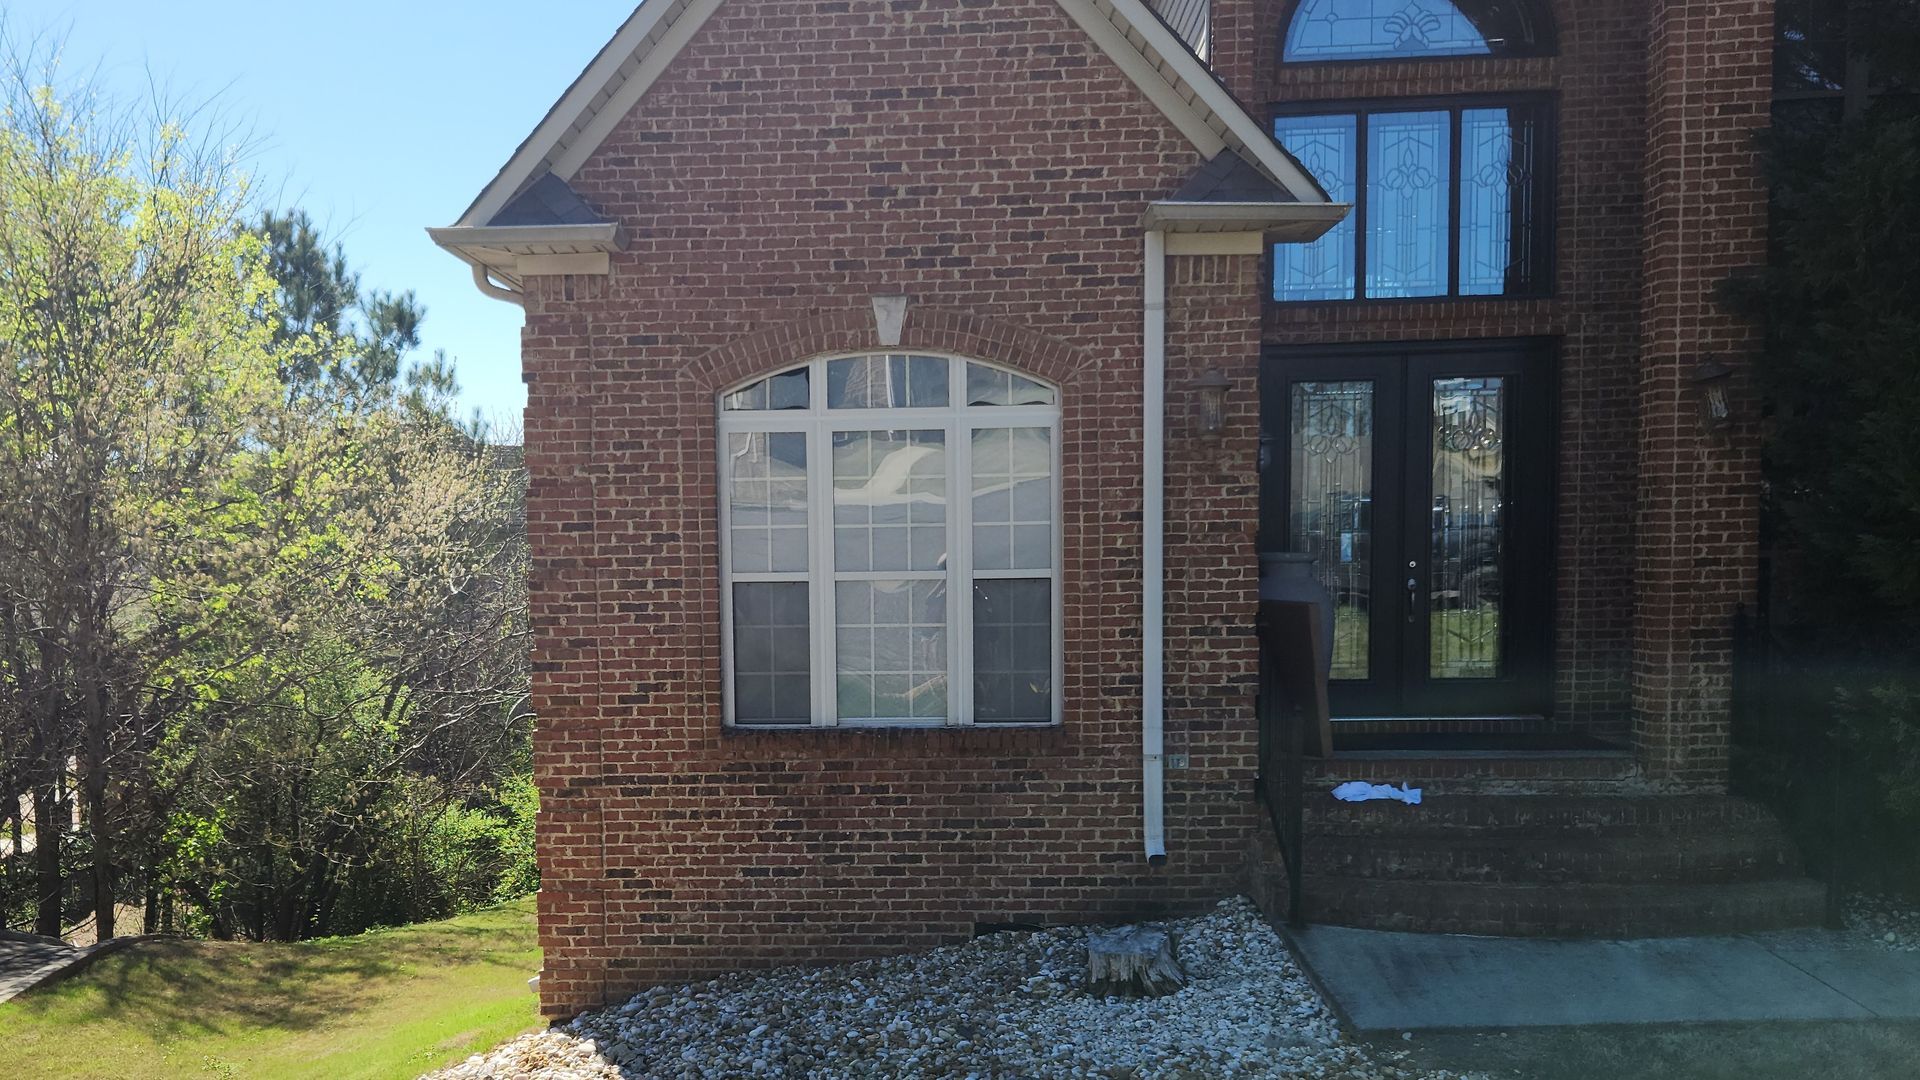 window tinting service in Birmingham AL - Now the room's purpose has been supported with the right privacy. With over 99% UV-Radiation blocked from entering the home windows in Birmingham AL